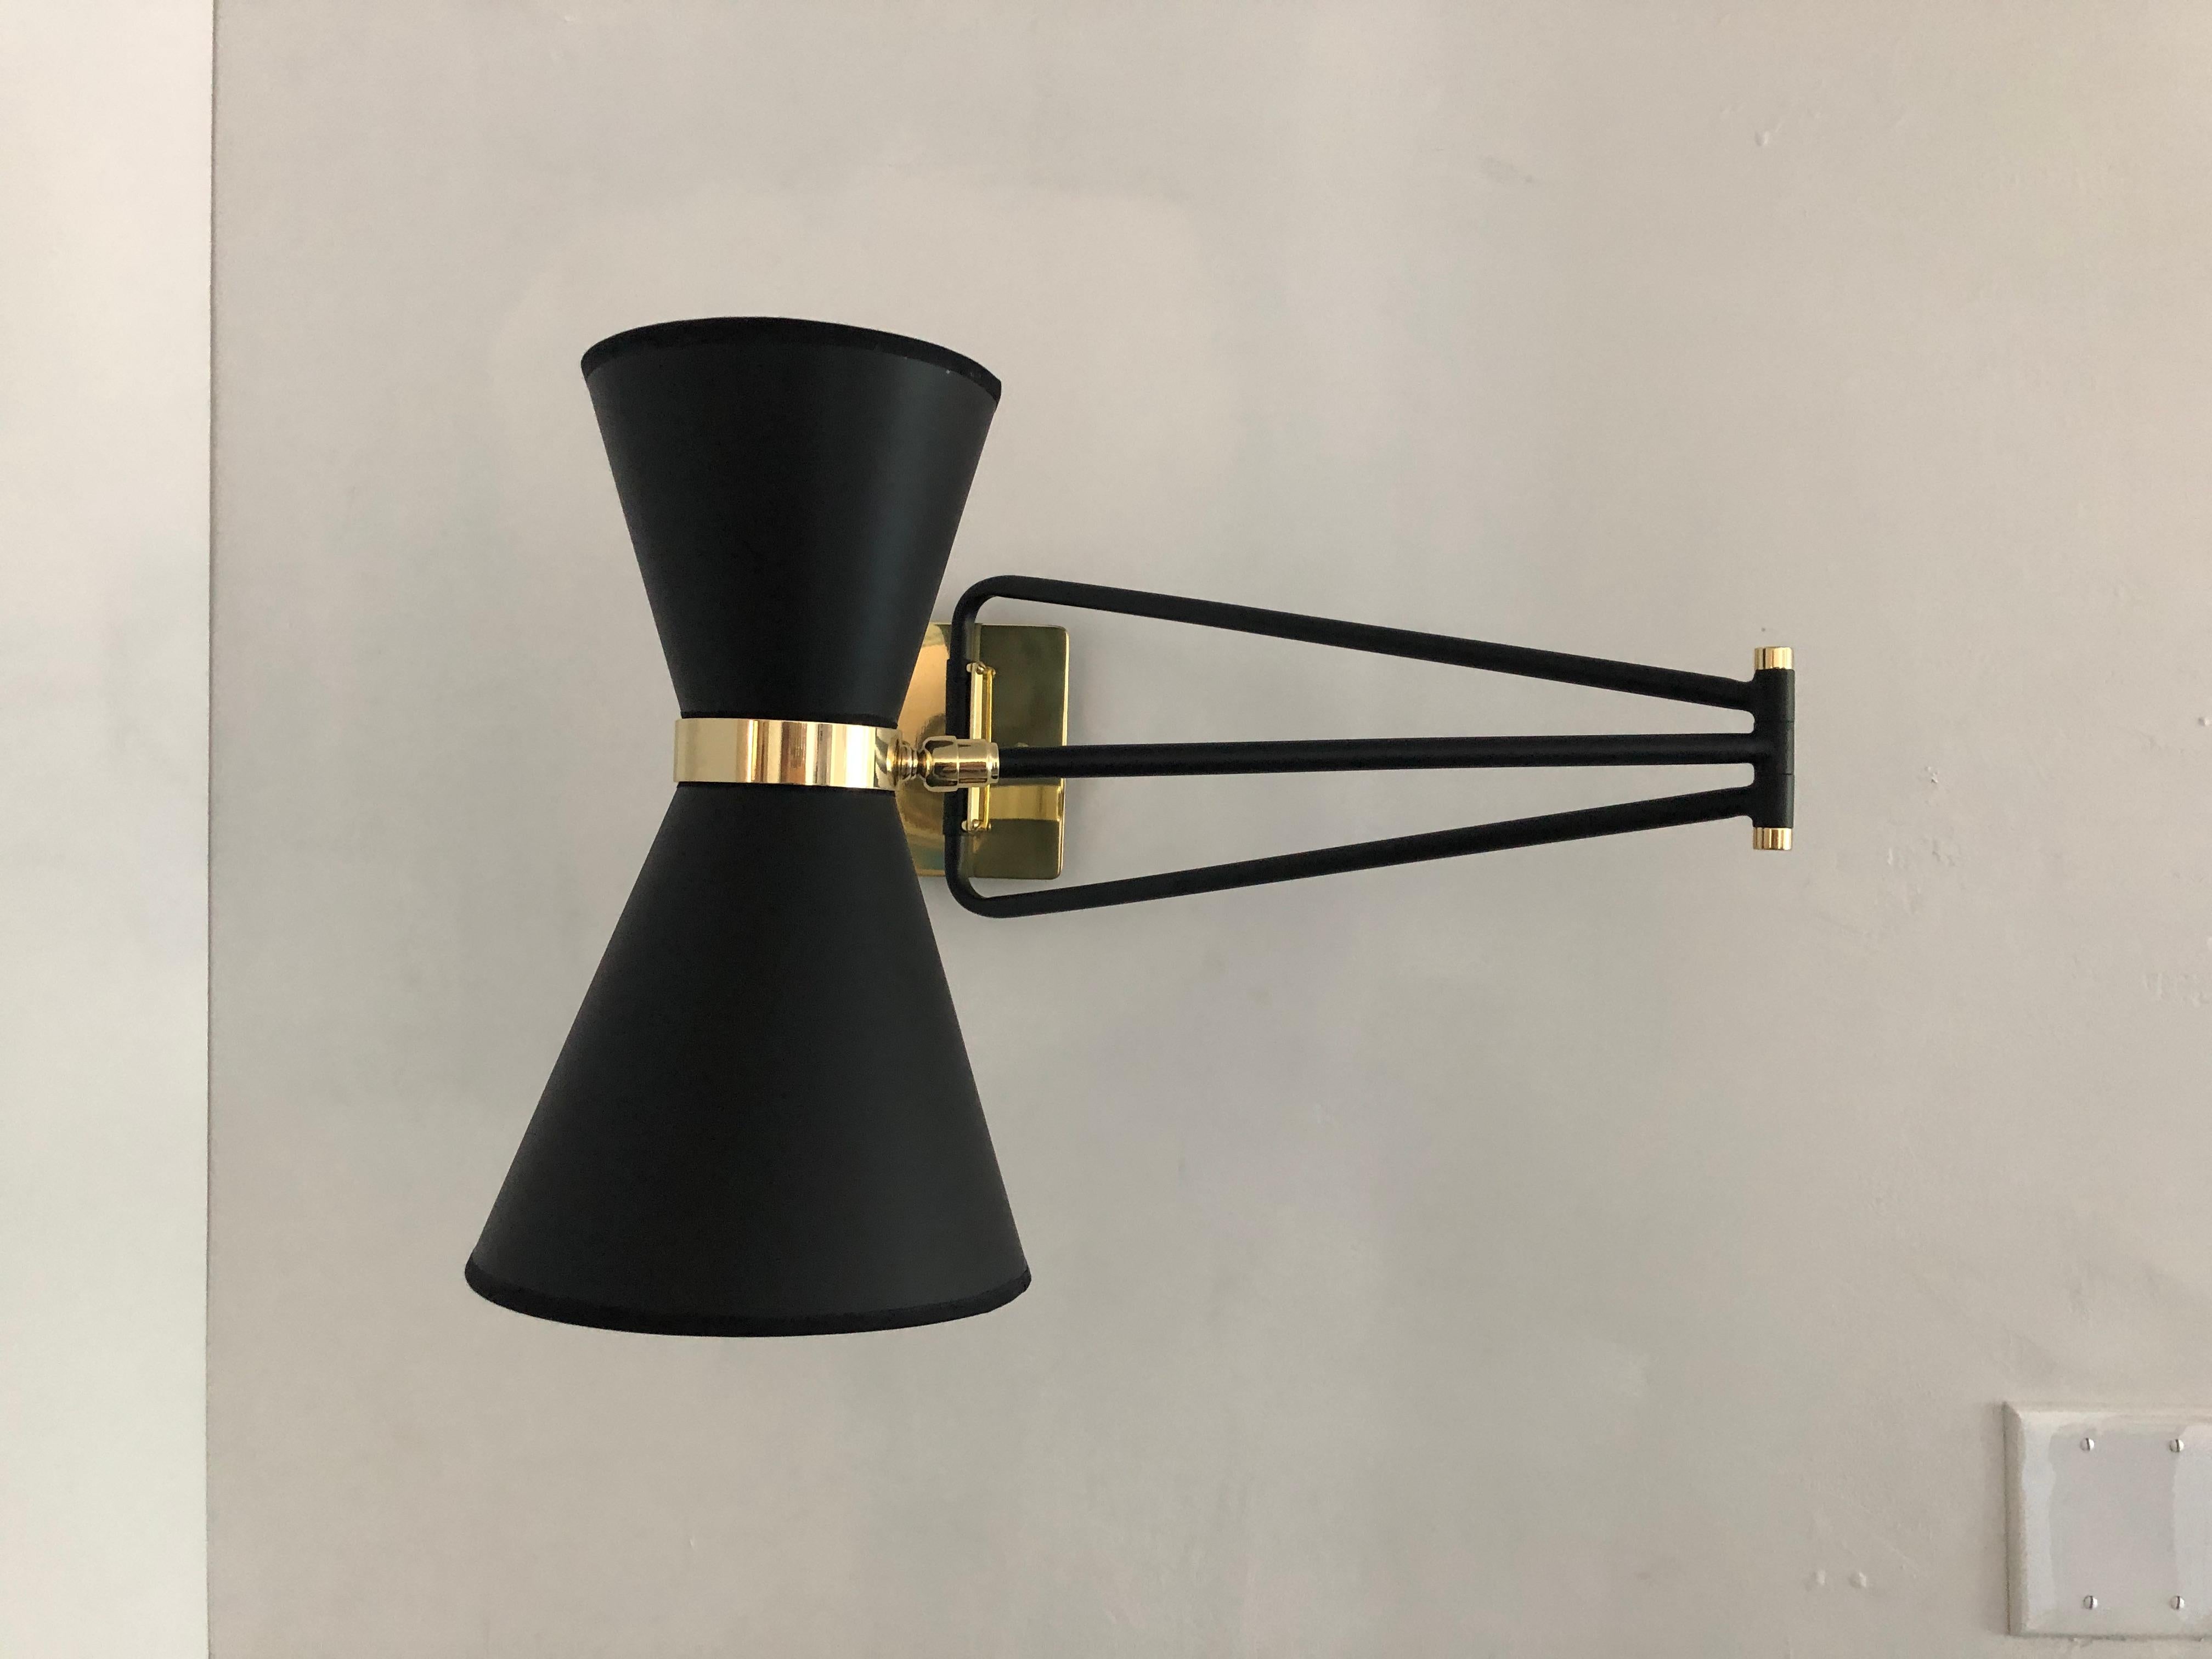 This sleek sconce is 1950s French midcentury by inspiration. The light with it double shade and articulated arm creates a versatile lighting source. The head pivots to direct the light of the two candelabra based bulbs in various direction while the